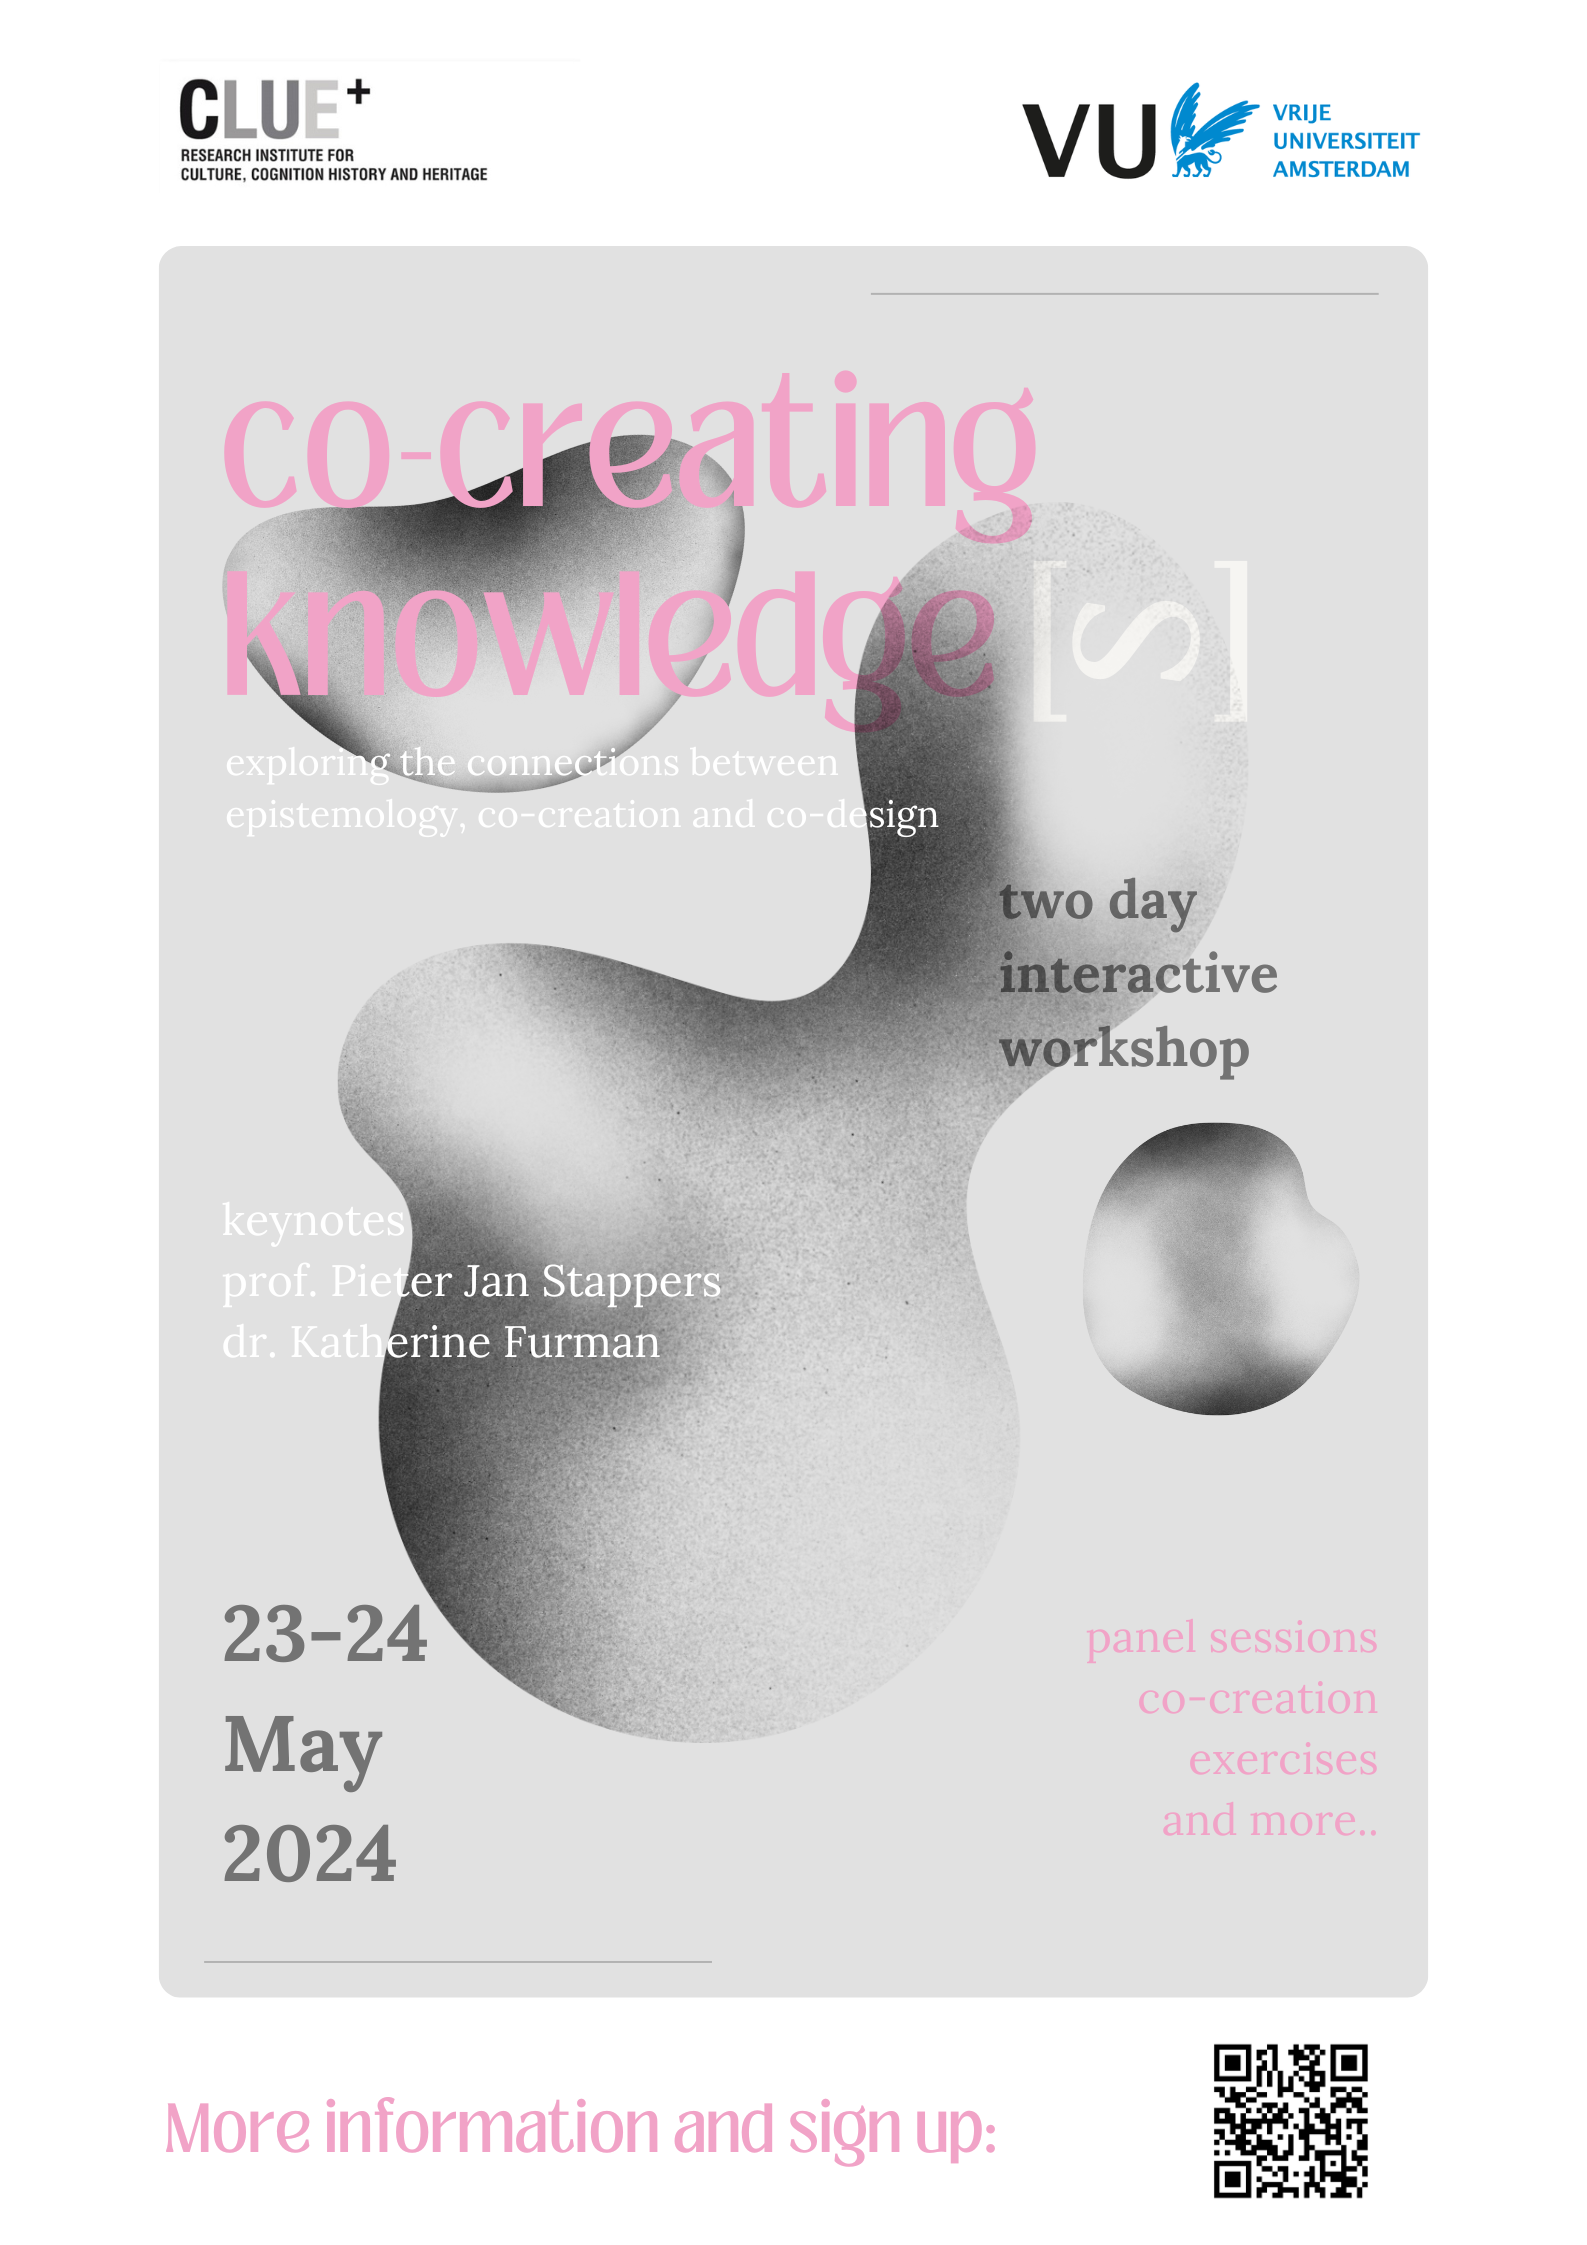 Workshop ‘Co-Creating Knowledge(s)’